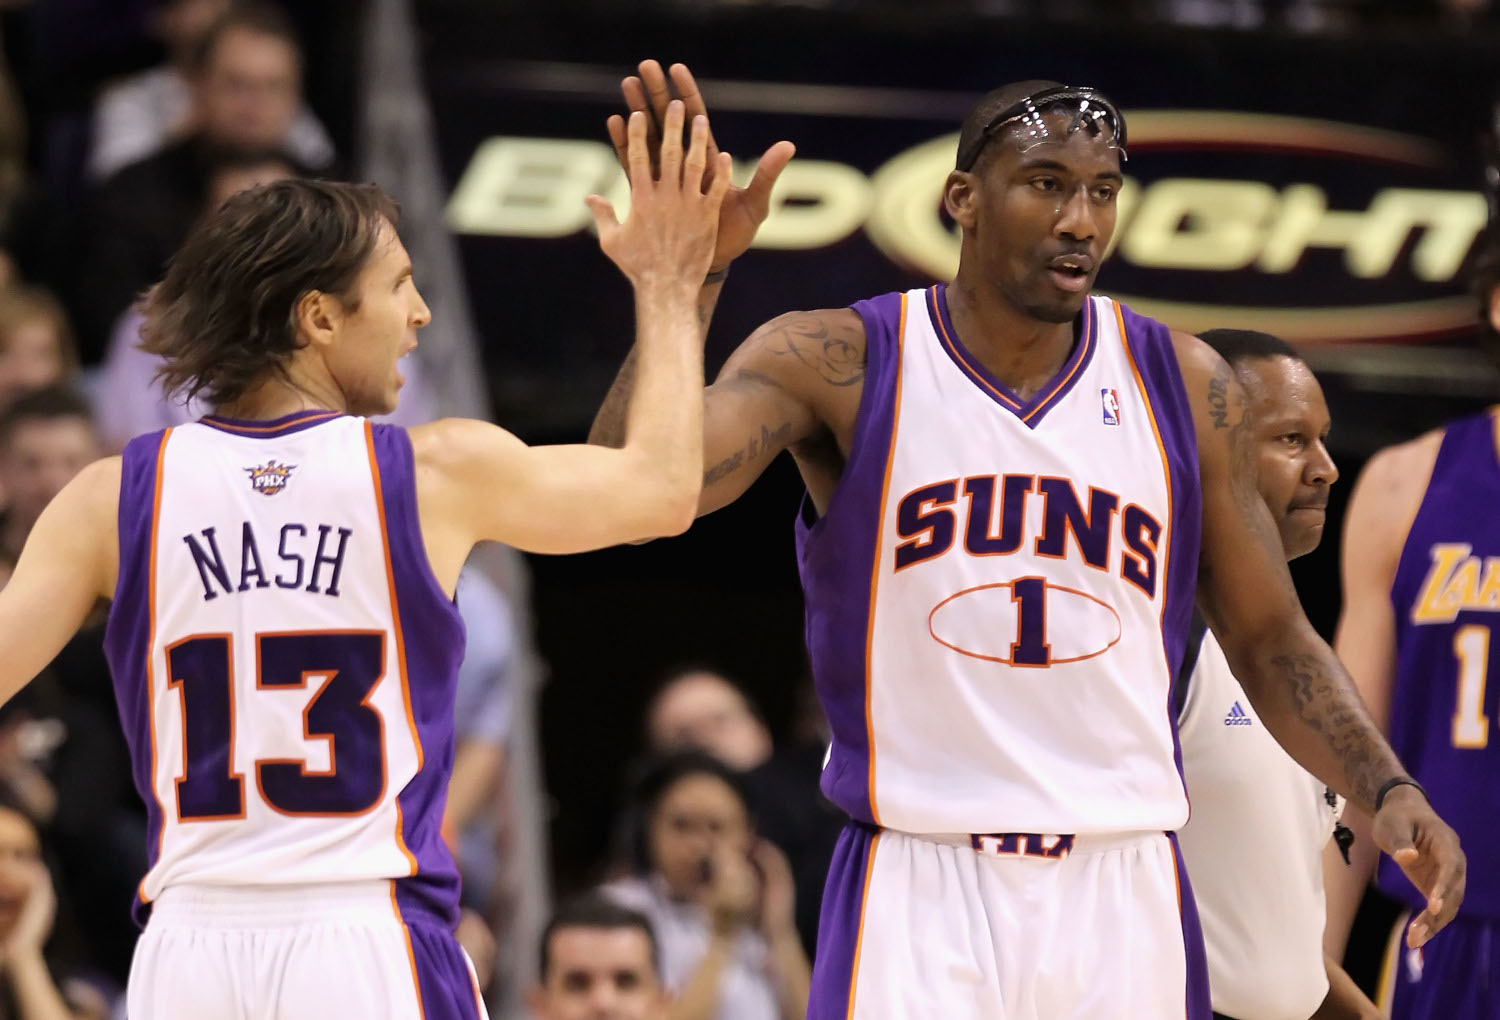 Steve Nash and Amar'e Stoudemire of the Phoenix Suns in 2010